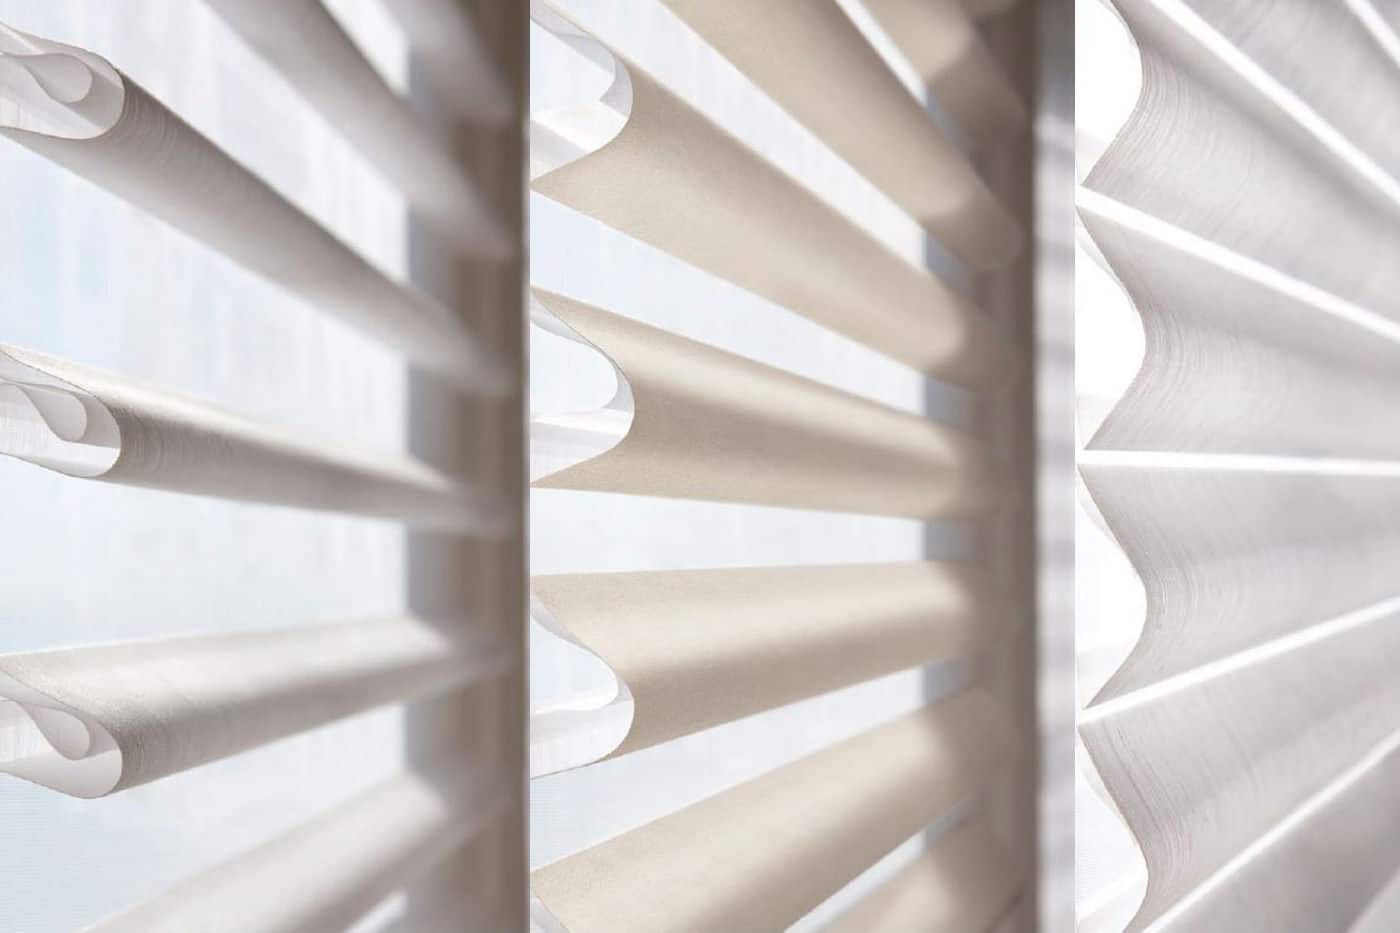 Pirouette Shades featuring softly curved, horizontal fabric vanes with a sheer fabric backing, allowing natural light to softly shine through. Made by Luxaflex. For sale in our Sydney showroom.